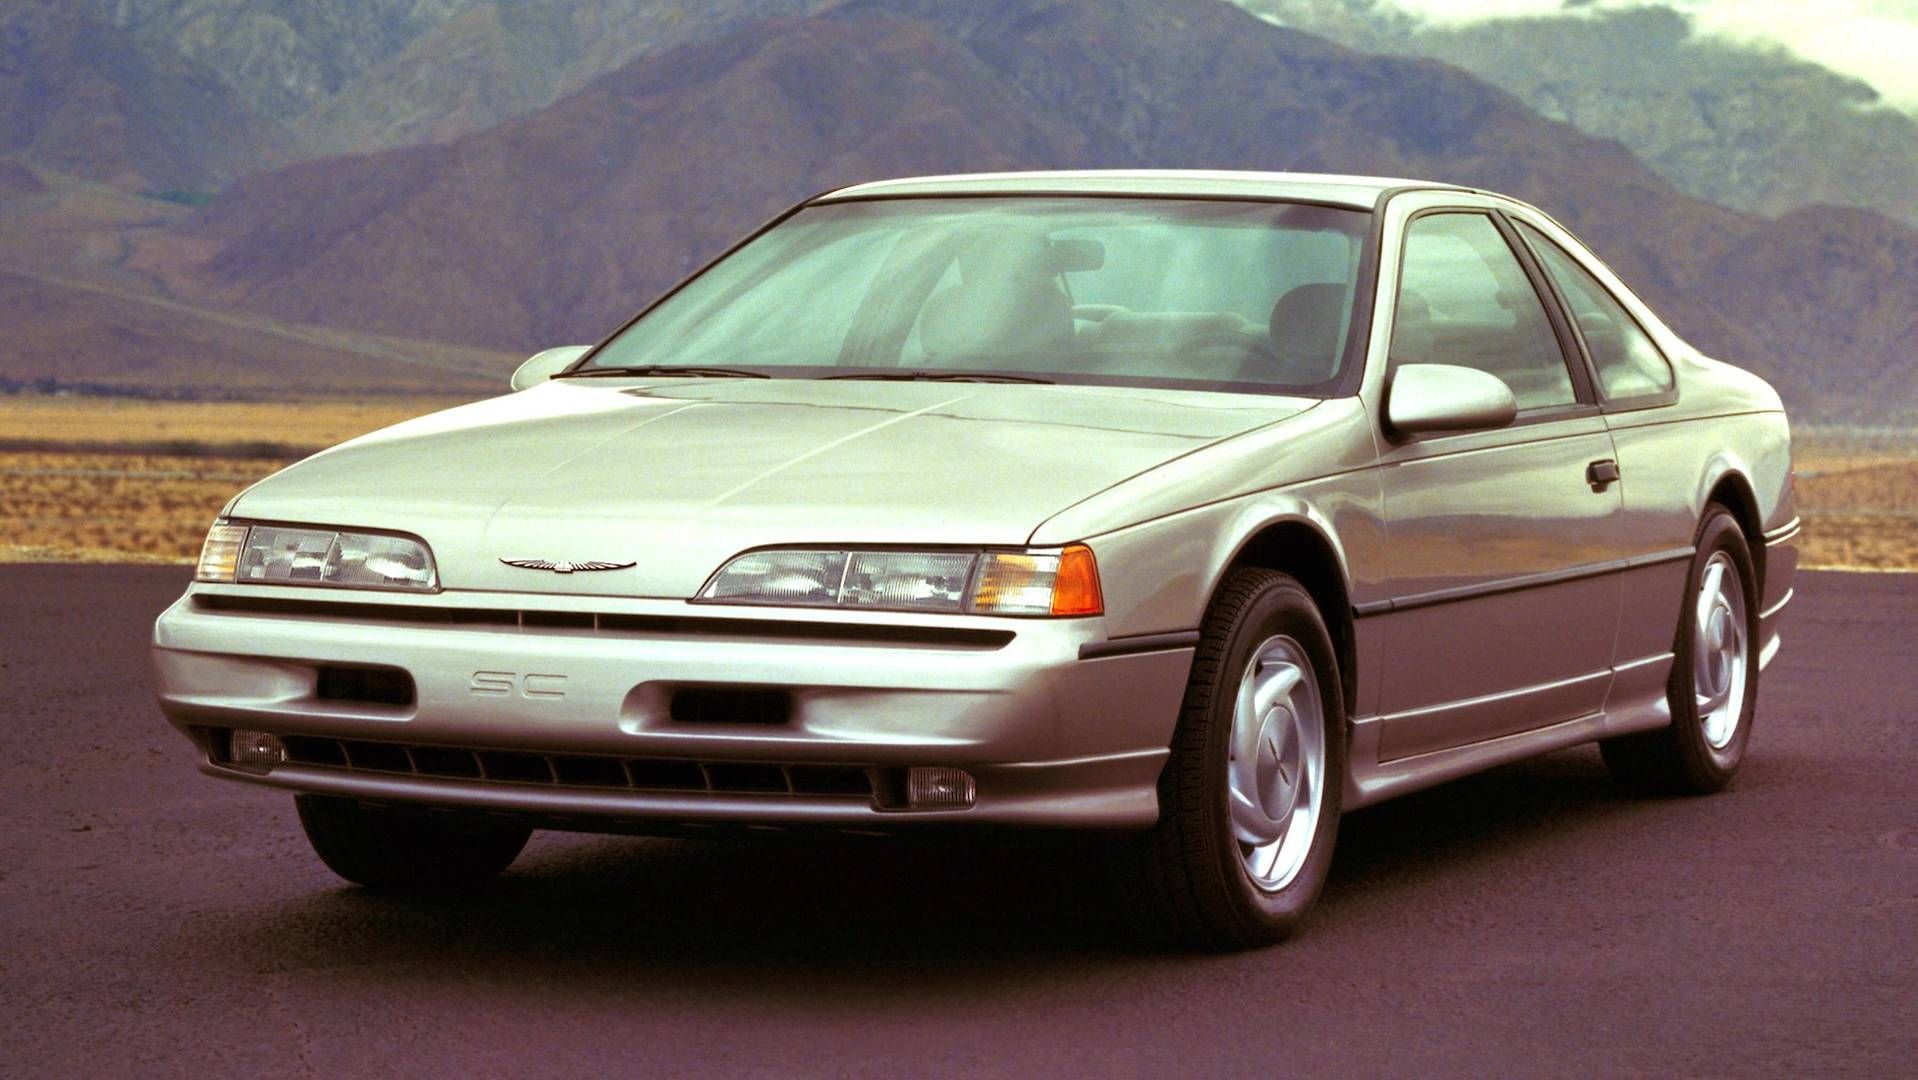 1989 Ford Thunderbird Coupe